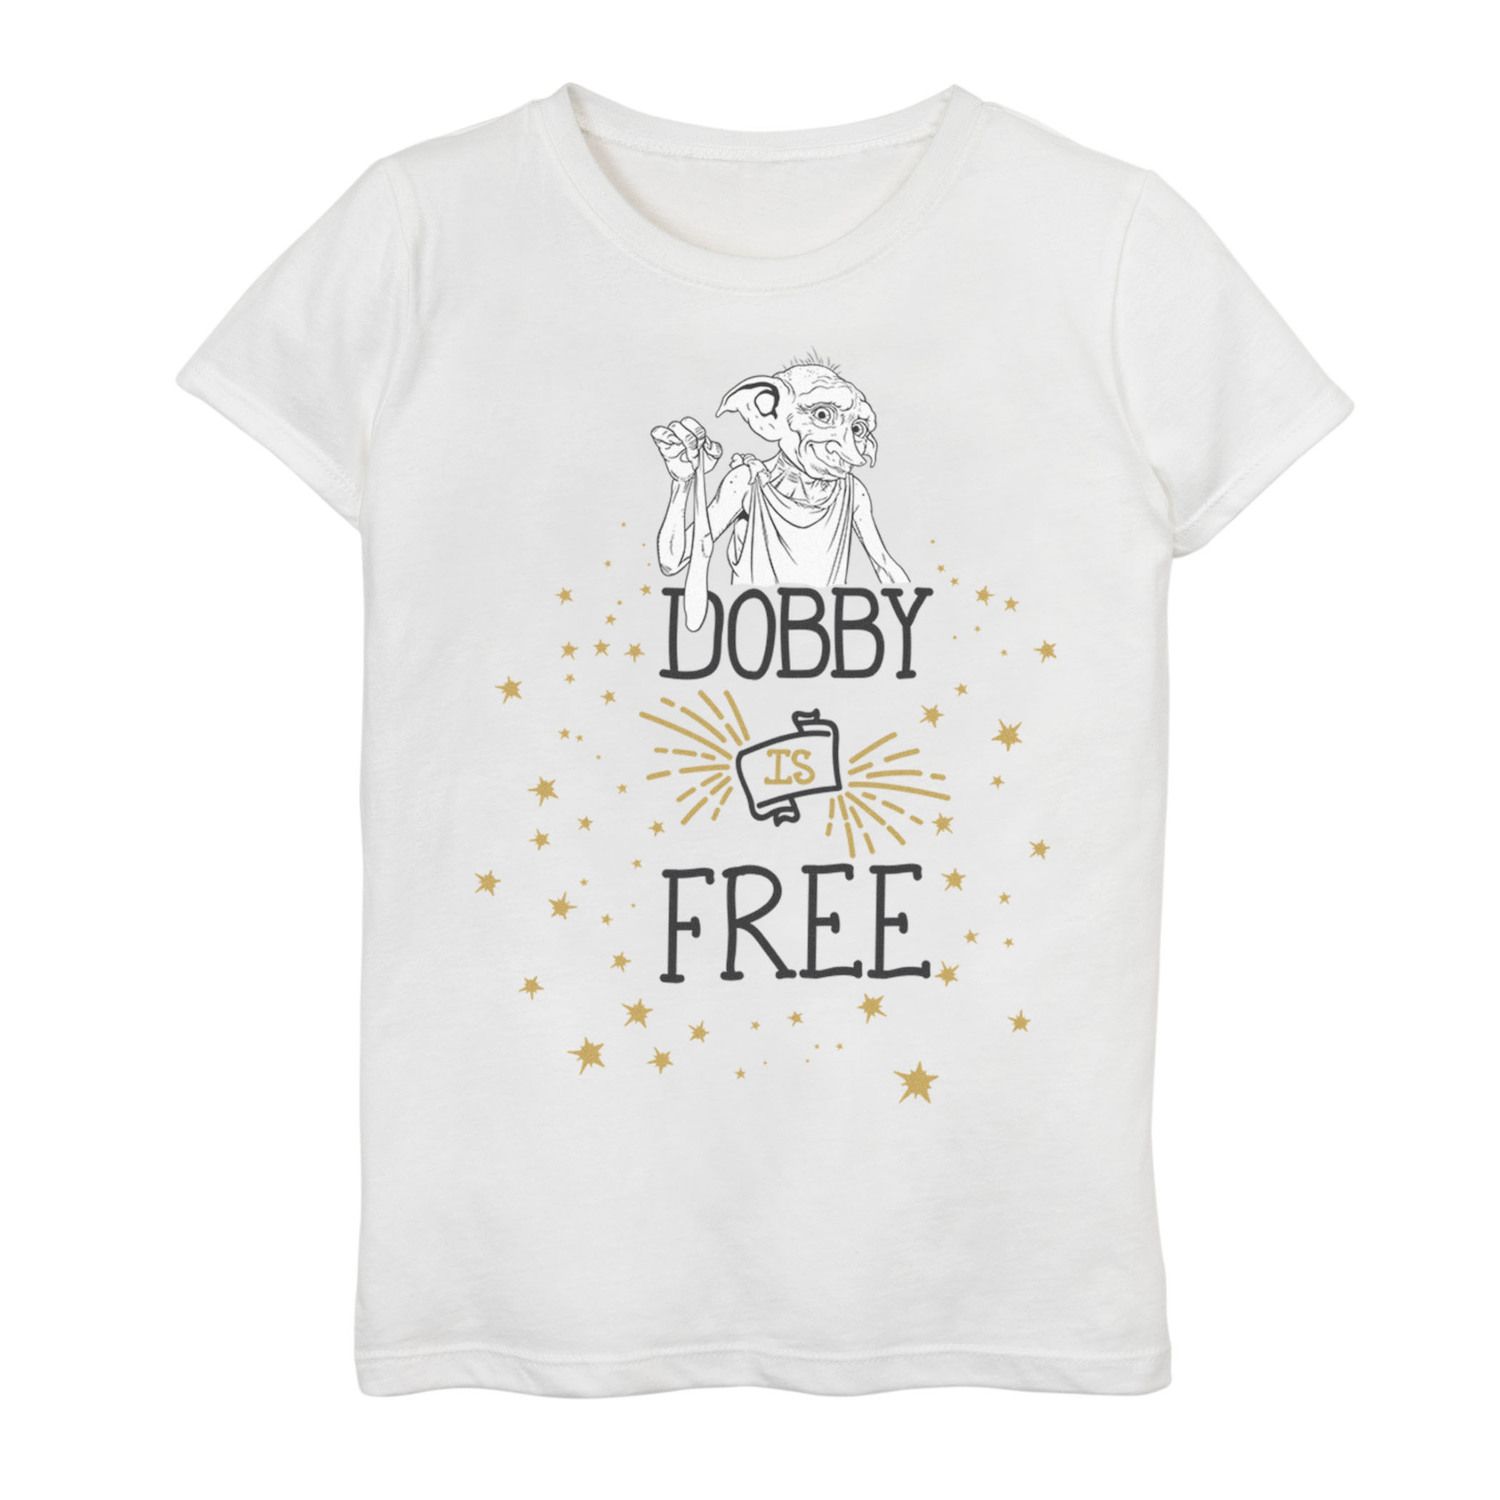 Image for Harry Potter Girls 7-16 Dobby Is Free Graphic Tee at Kohl's.